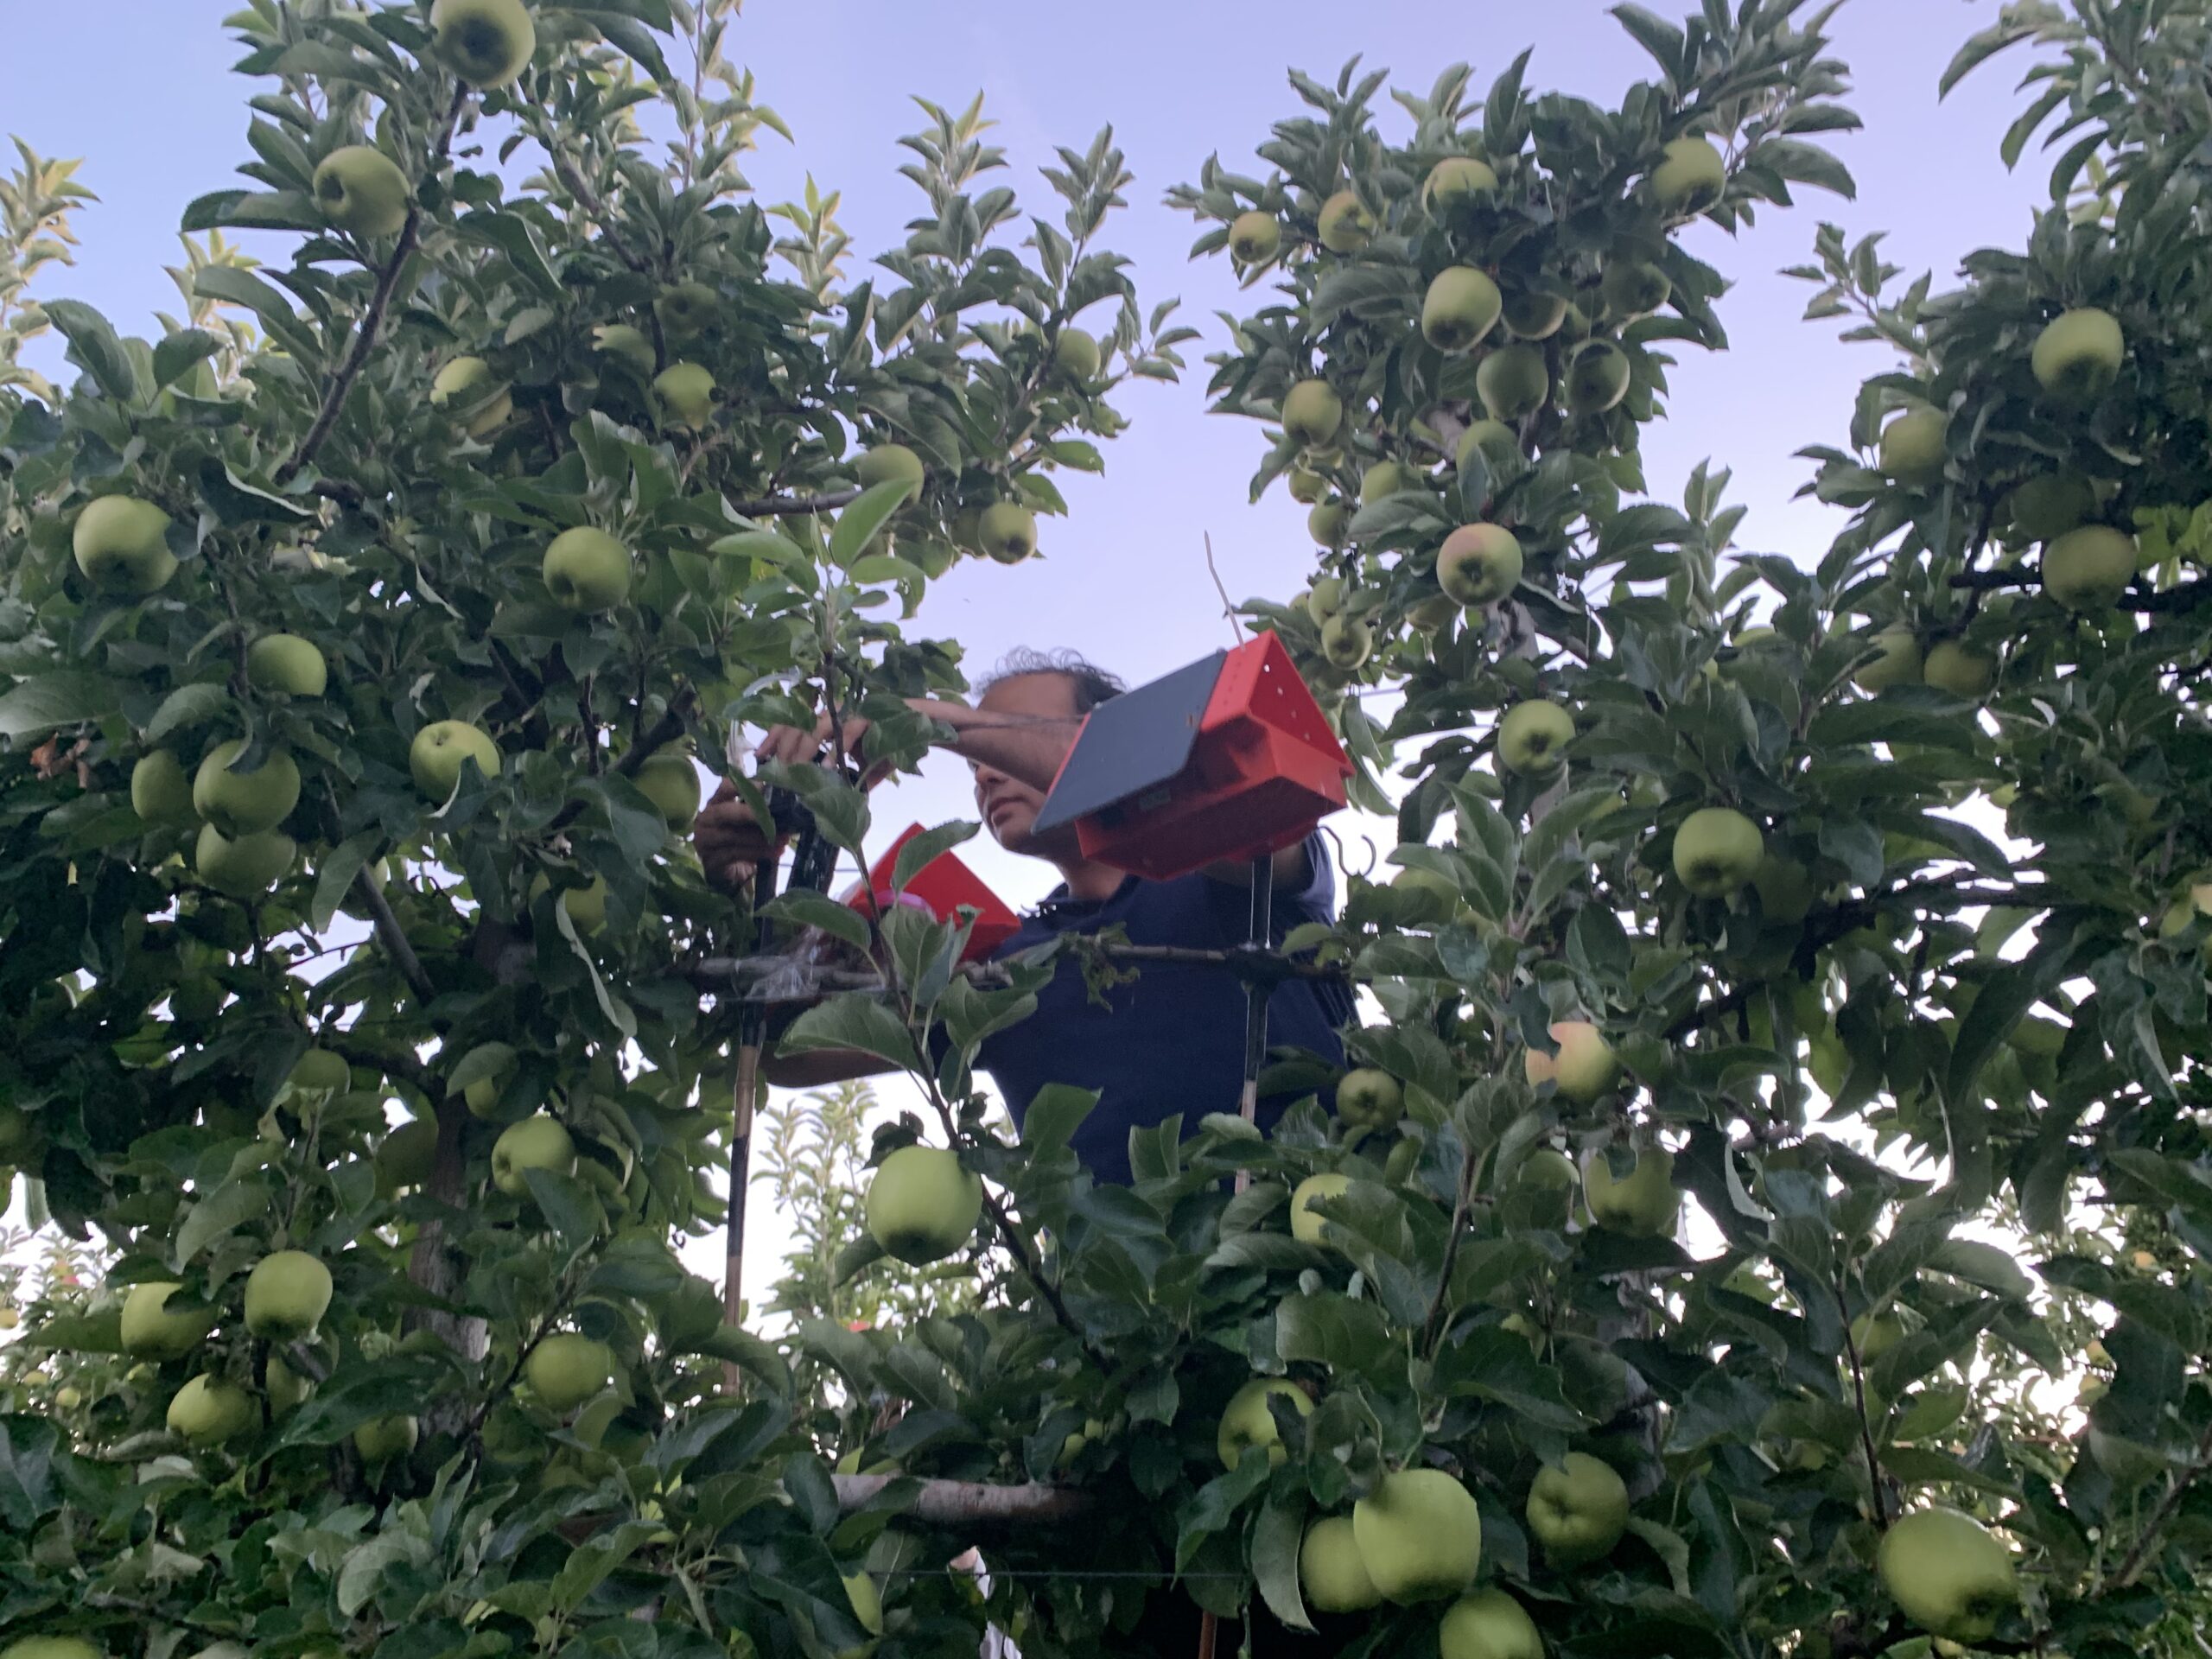 Remote pest managment with automated traps - Good Fruit Grower